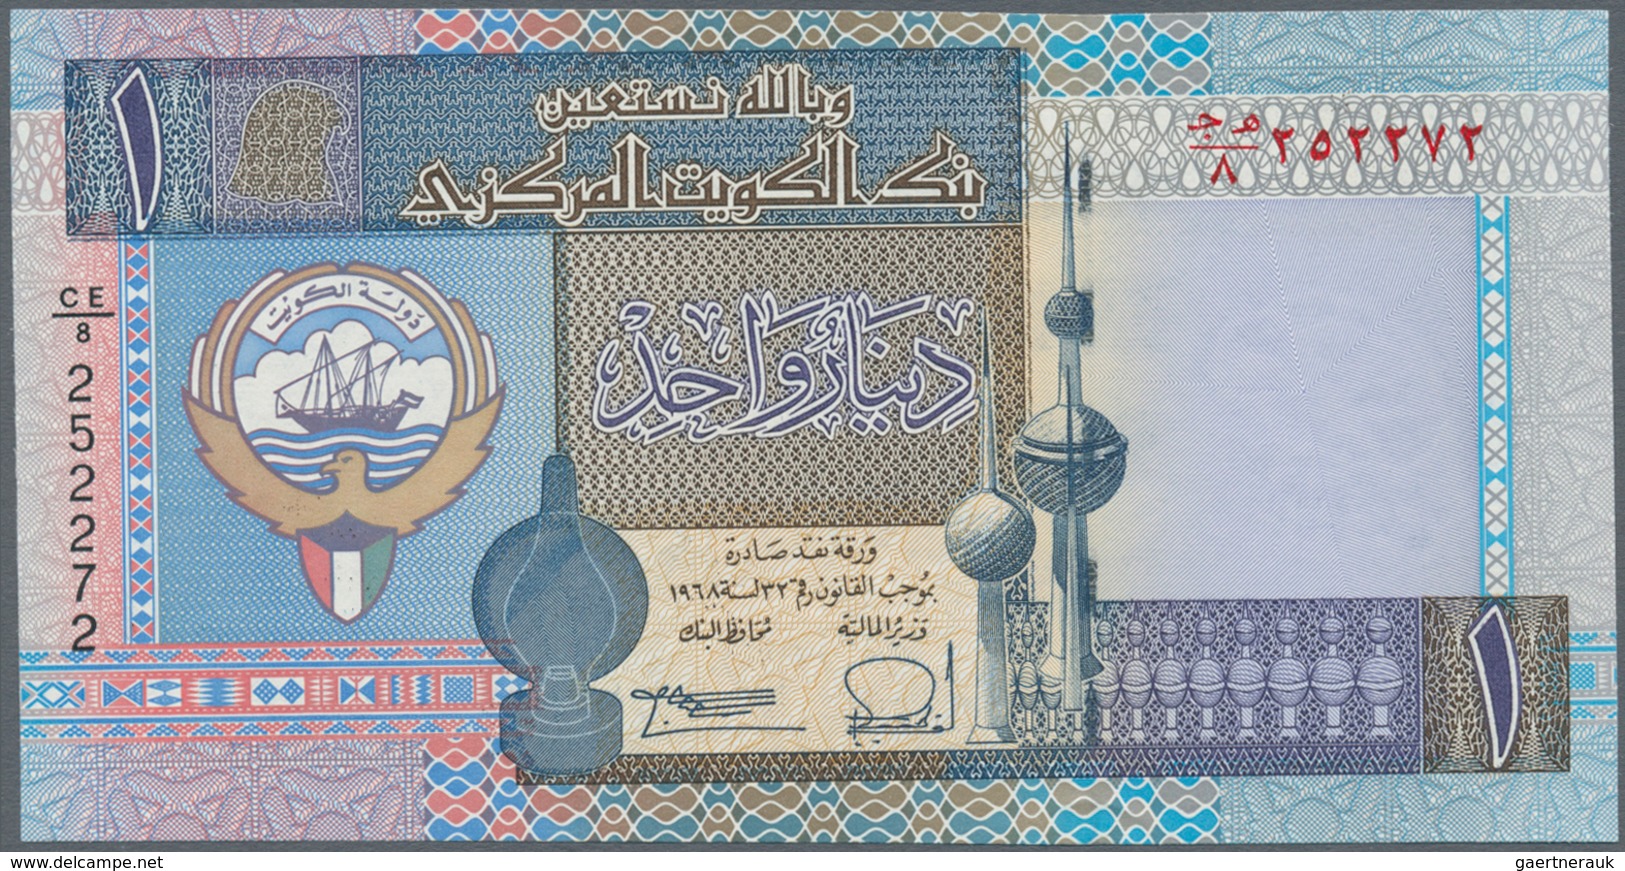 Middle East / Naher Osten: lot of 120 banknotes Middle East containing mostly modern time banknotes